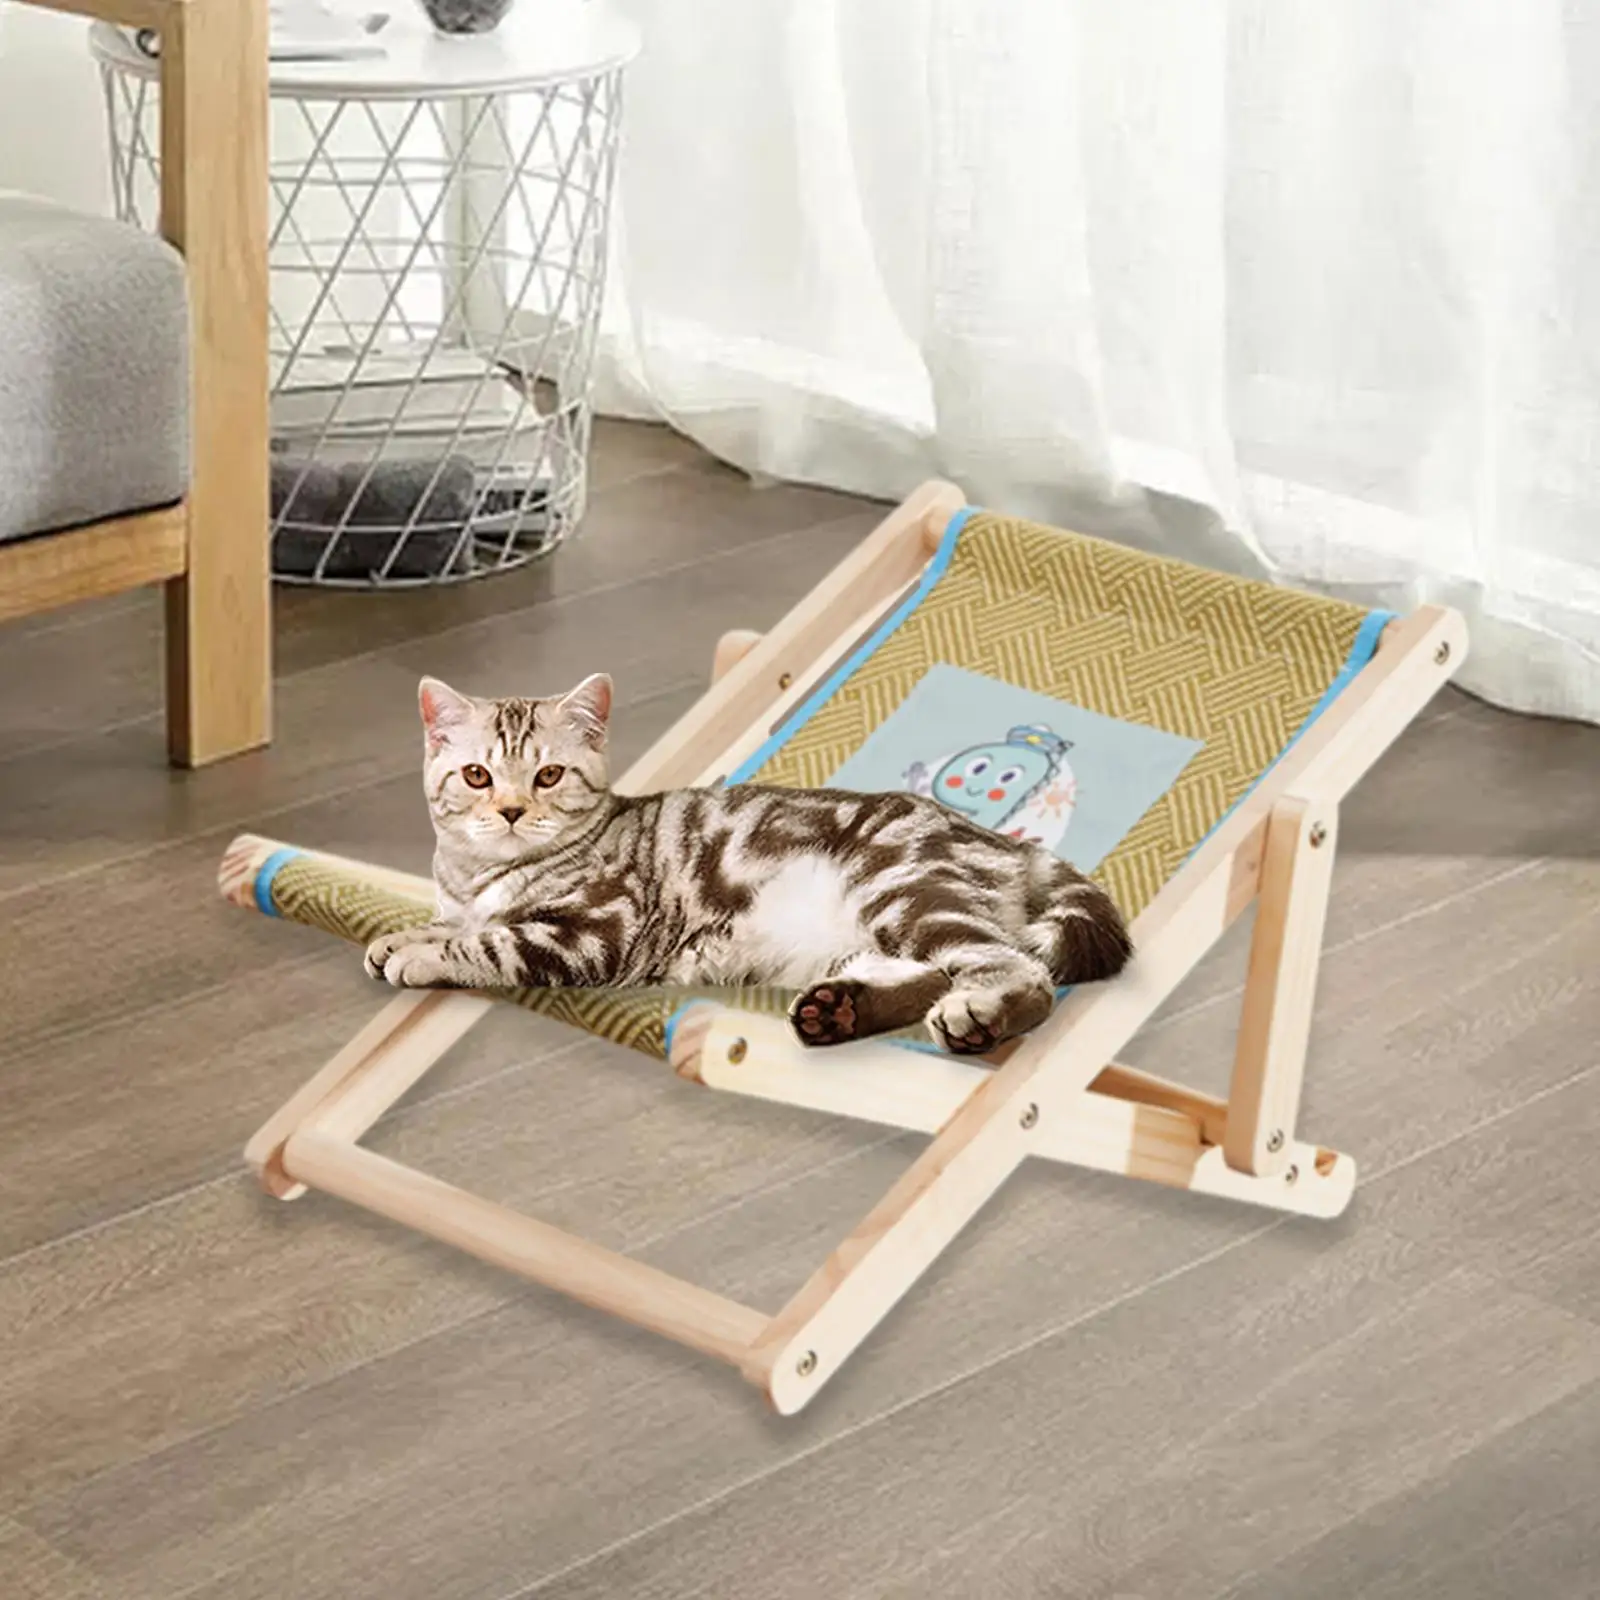 Cat Hammock Chair Cat Scratcher Bed Wooden Cat Furniture Fine Workmanship Adjustable Multipurpose for Small Cats and Kittens